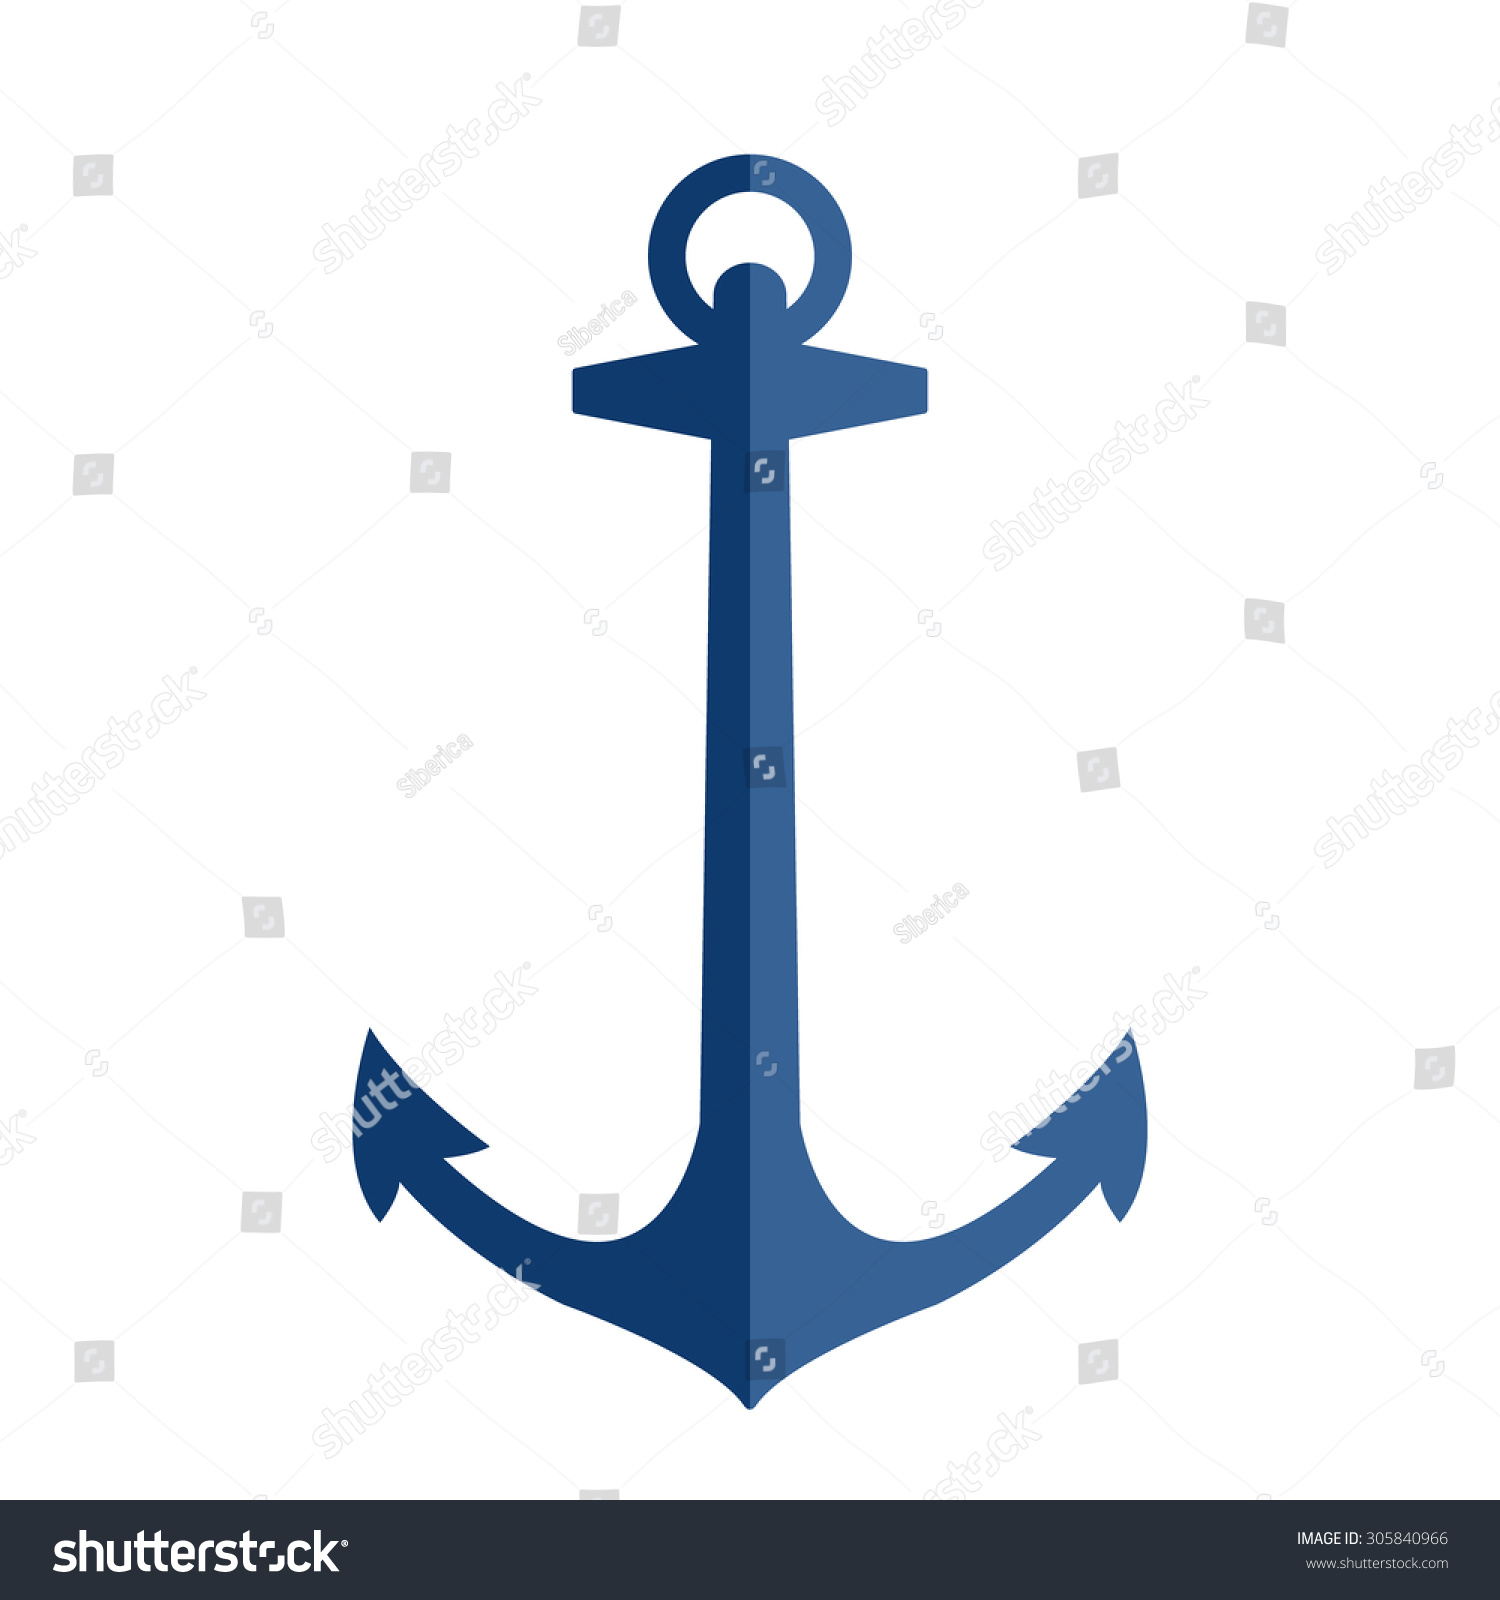 SVG of Two colors flat style ship anchor logo isolated on white background. Flat ship anchor logo vector illustration. svg